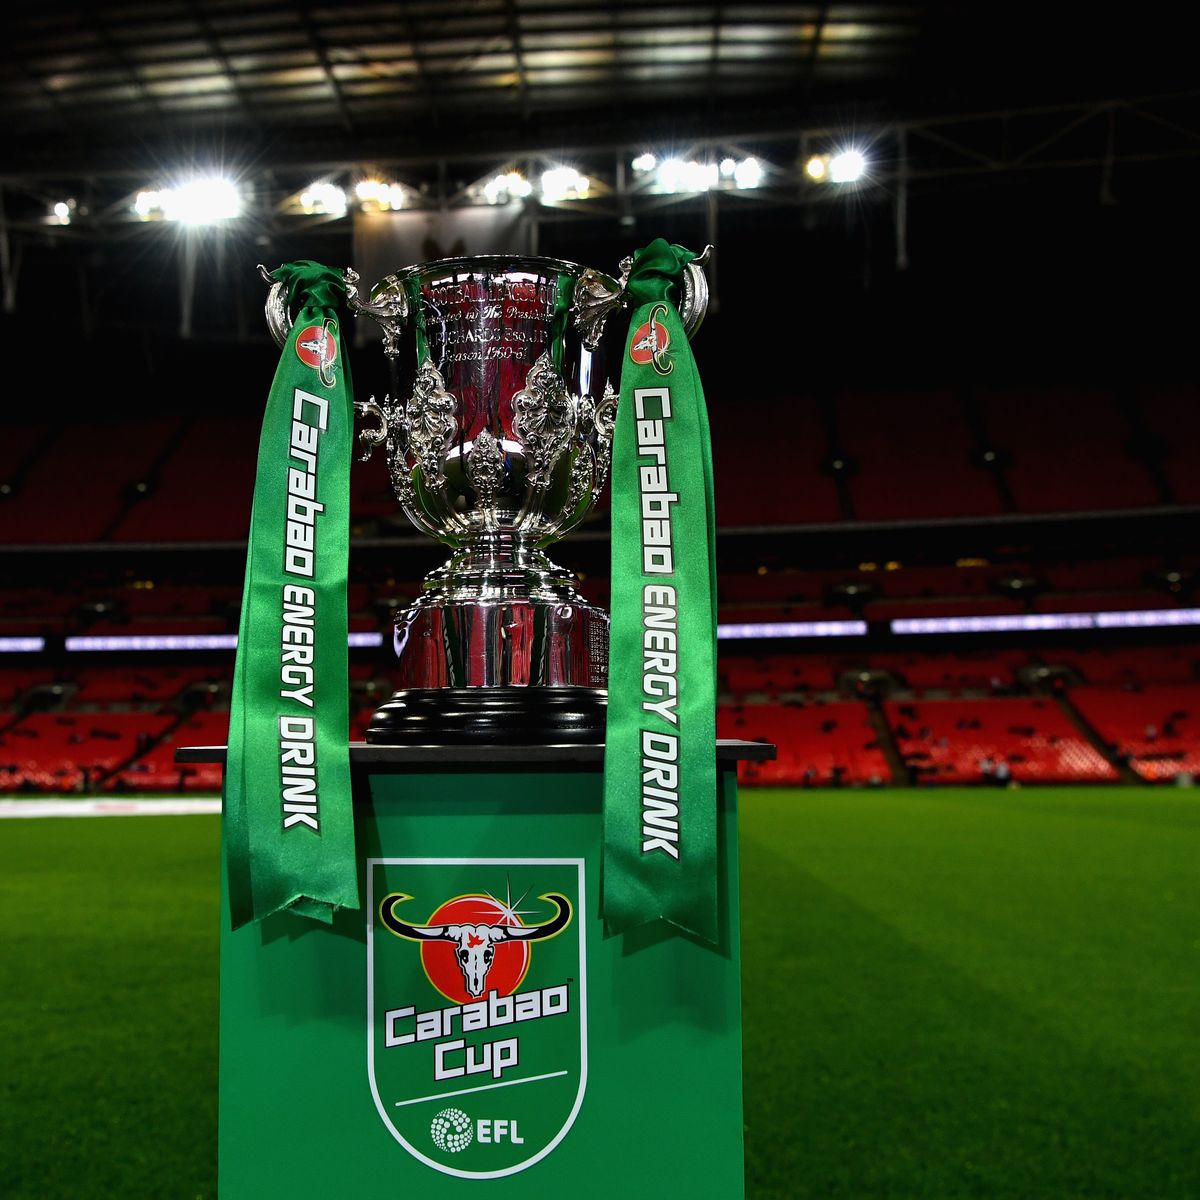 Carabao Cup: Arsenal face Leicester, Man City play Bournemouth or